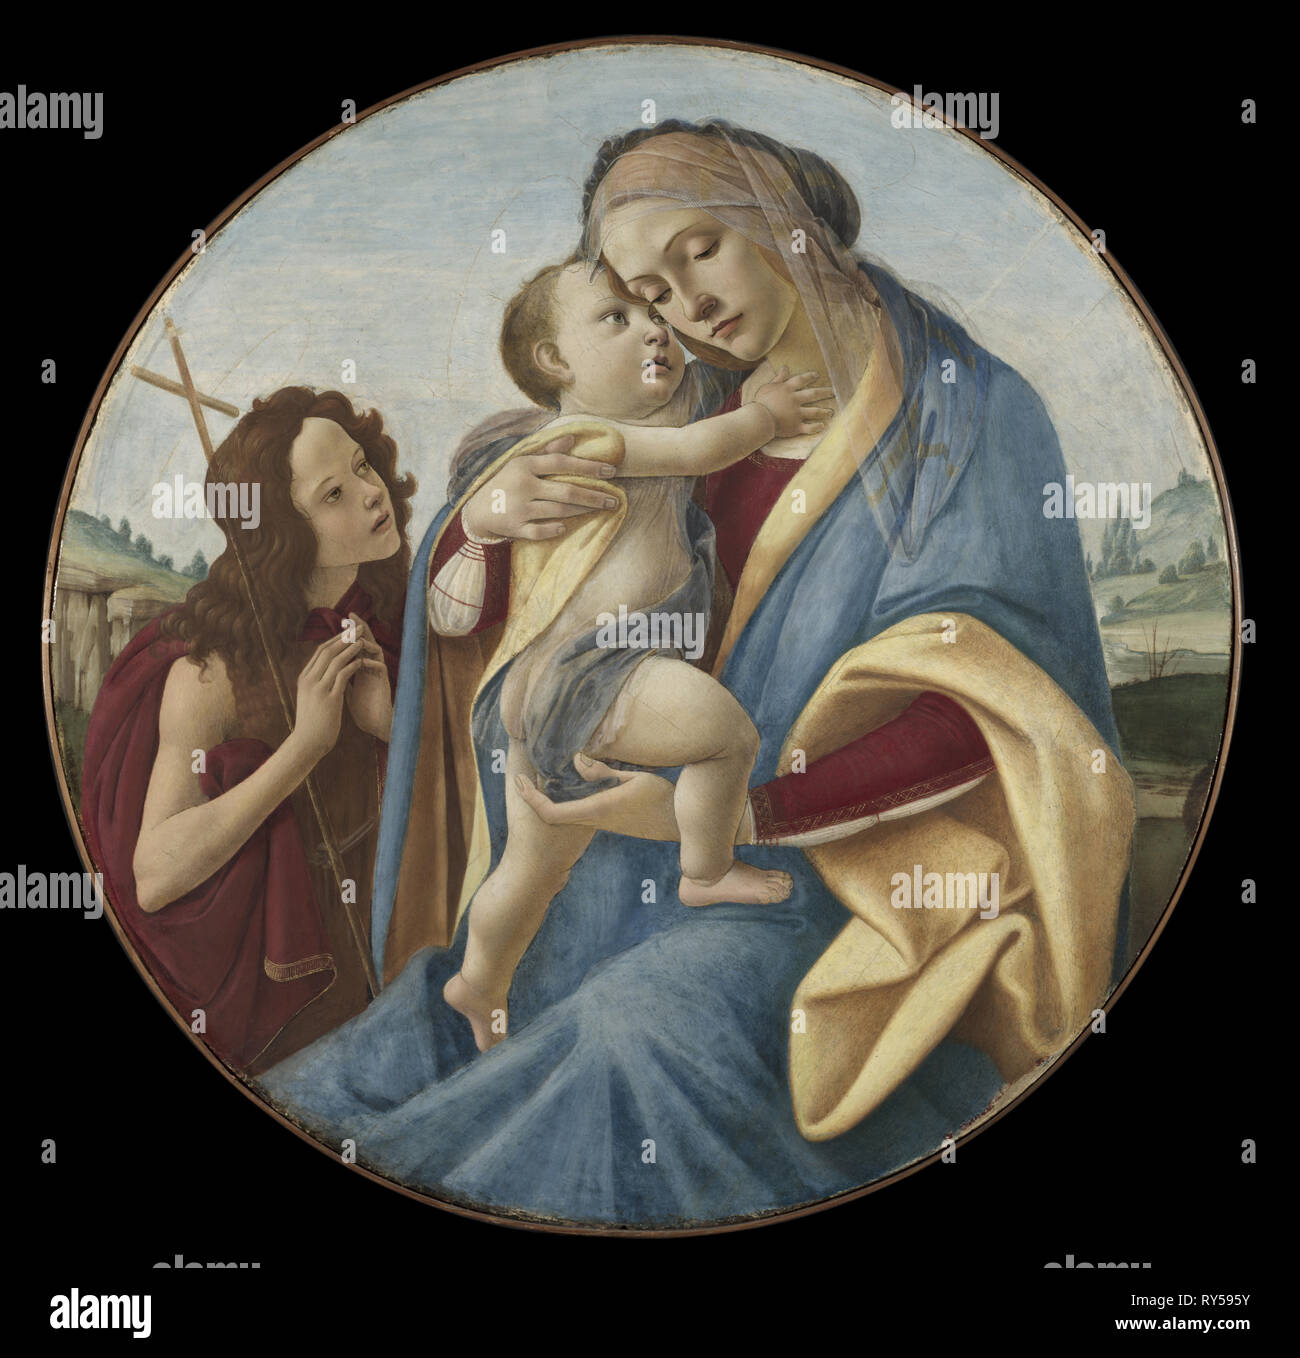 Virgin and Child with the Young Saint John the Baptist, c. 1490. Sandro Botticelli (Italian, 1444/45-1510), and Workshop. Tempera and oil on wood; framed: 115 x 12.5 cm (45 1/4 x 4 15/16 in.); diameter: 68 cm (26 3/4 in Stock Photo